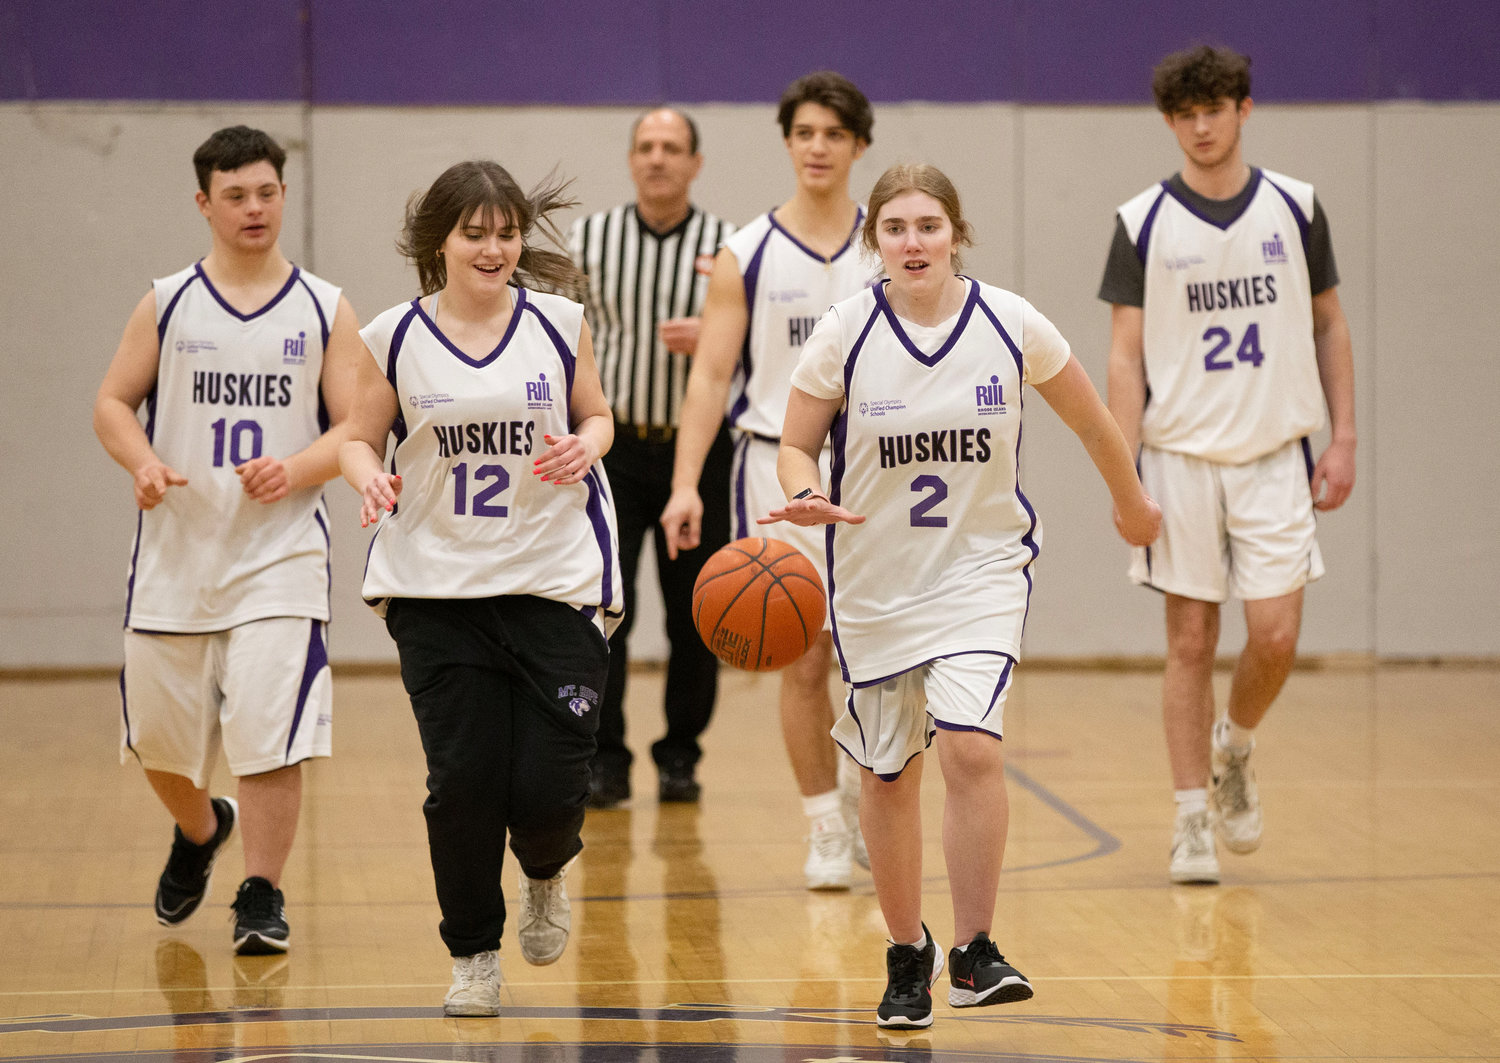 Mason Conte, Maci Catalano, Jesse Wilson, Charlotte Mowery and Evan Garies head up to the offensive court during the Huskies' game against Rogers at the high school on Thursday.